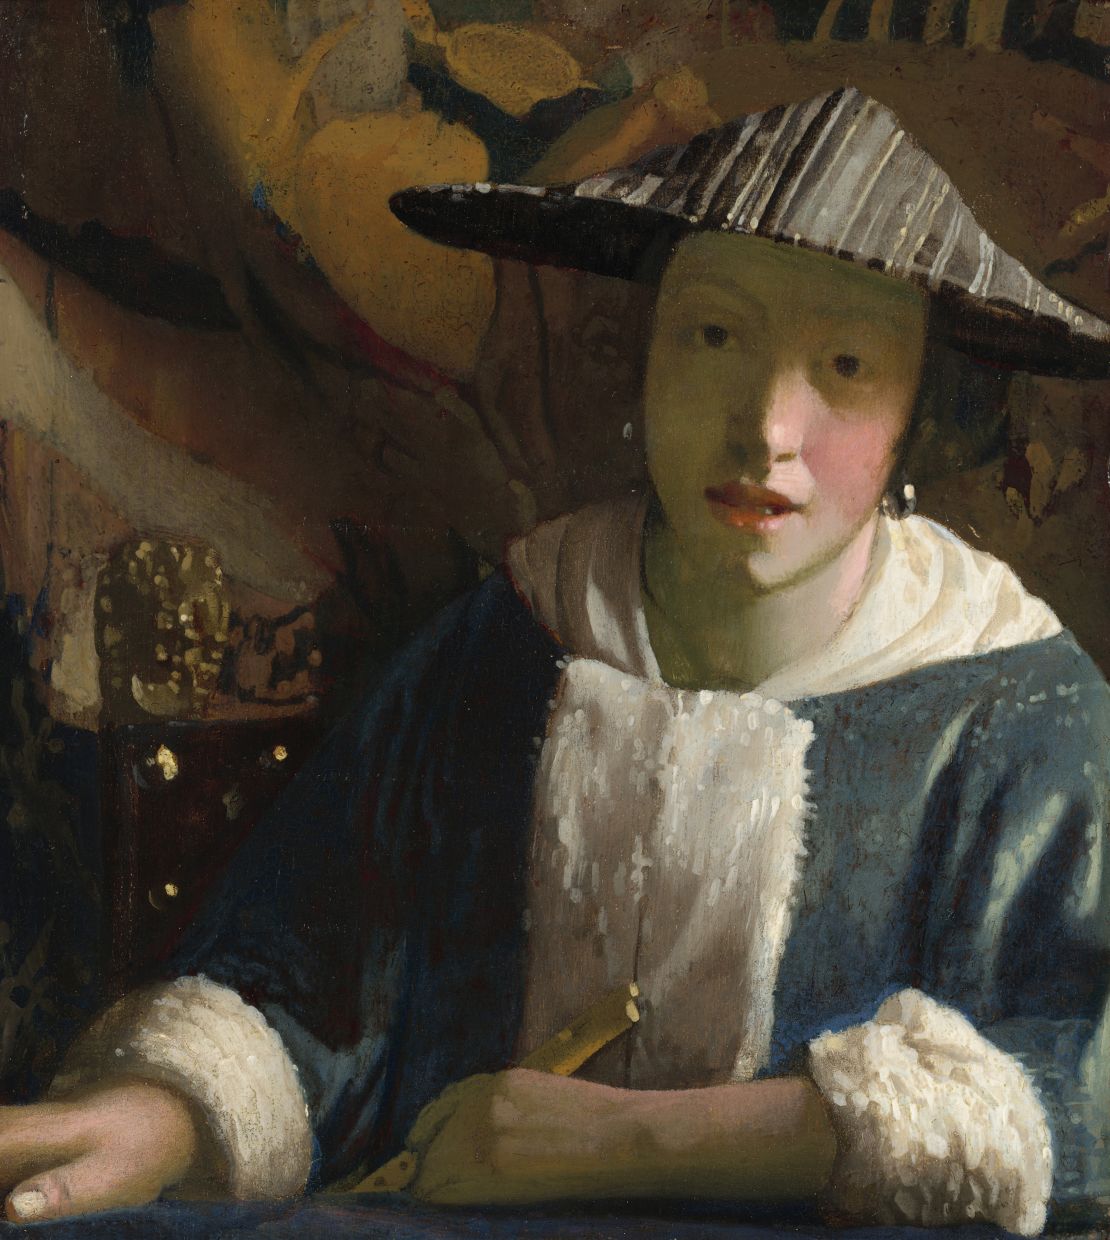 "Girl with the Flute" has been downgraded, now believed to be painted by a close associate.